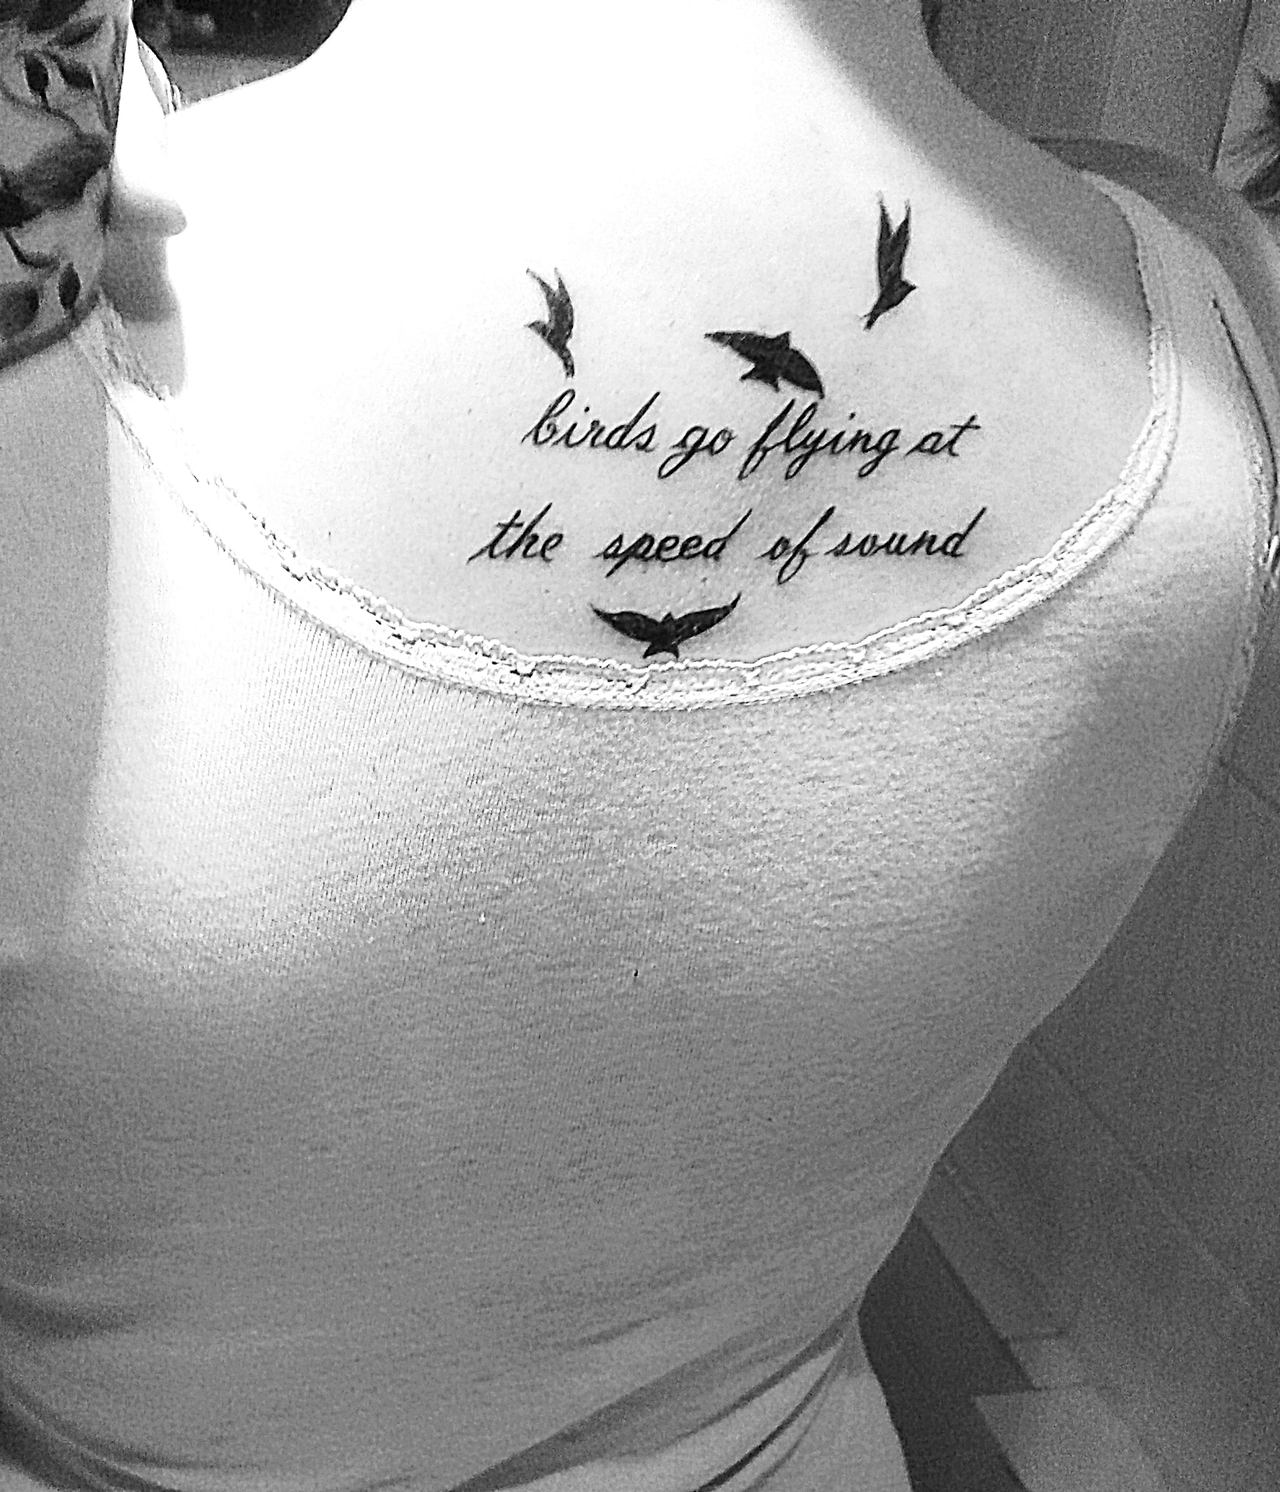 Bird Tattoos Designs, Ideas and Meaning | Tattoos For You